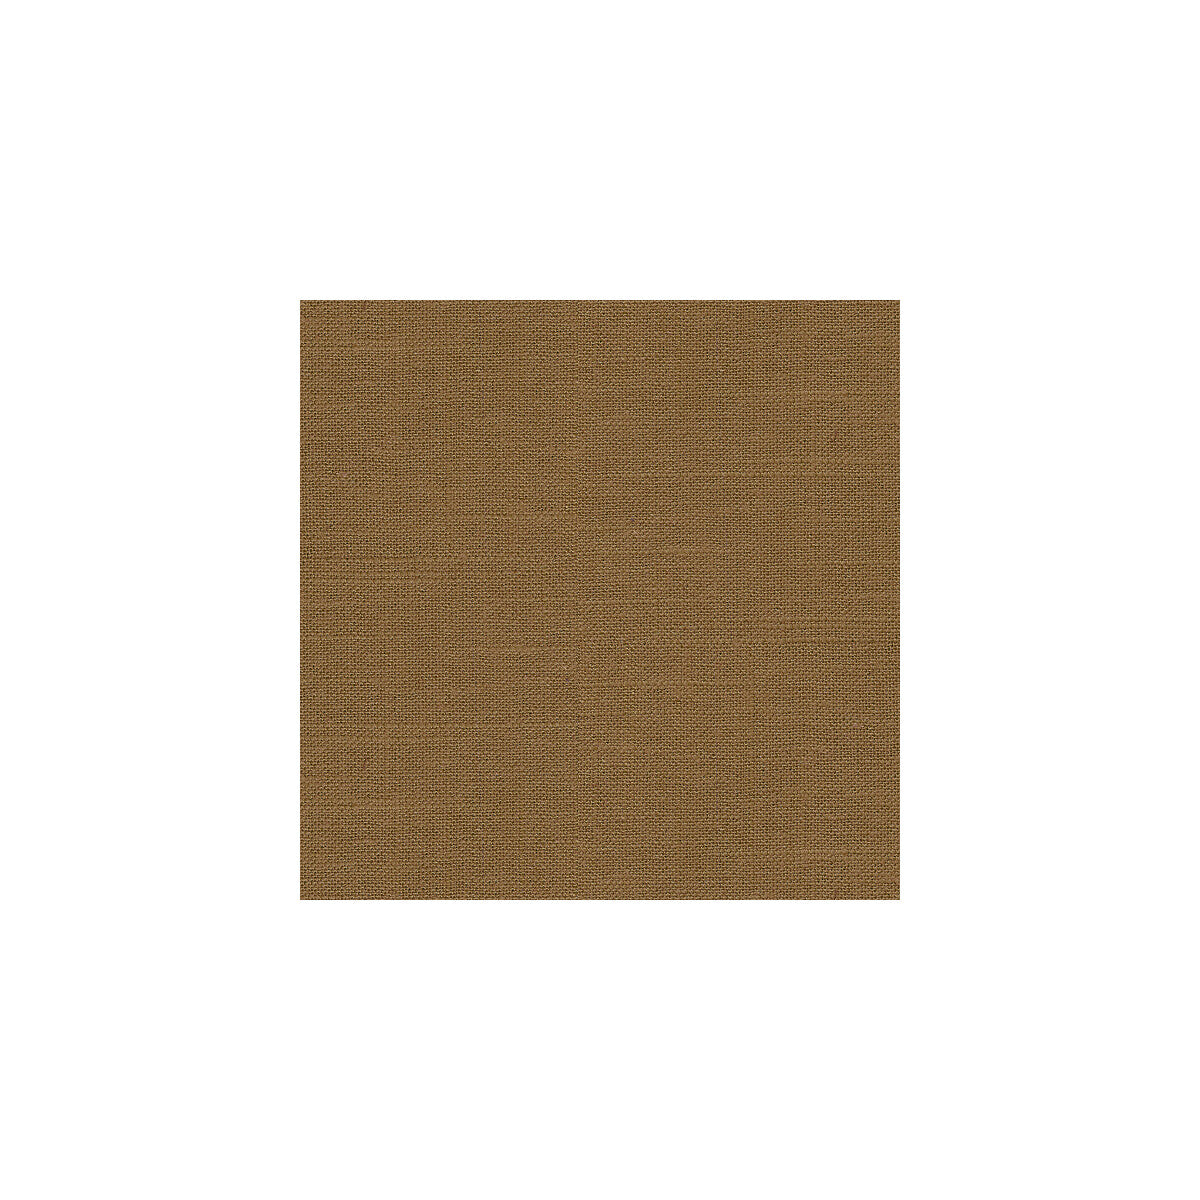 Barnegat fabric in tan color - pattern 24573.416.0 - by Kravet Basics in the Perfect Plains collection